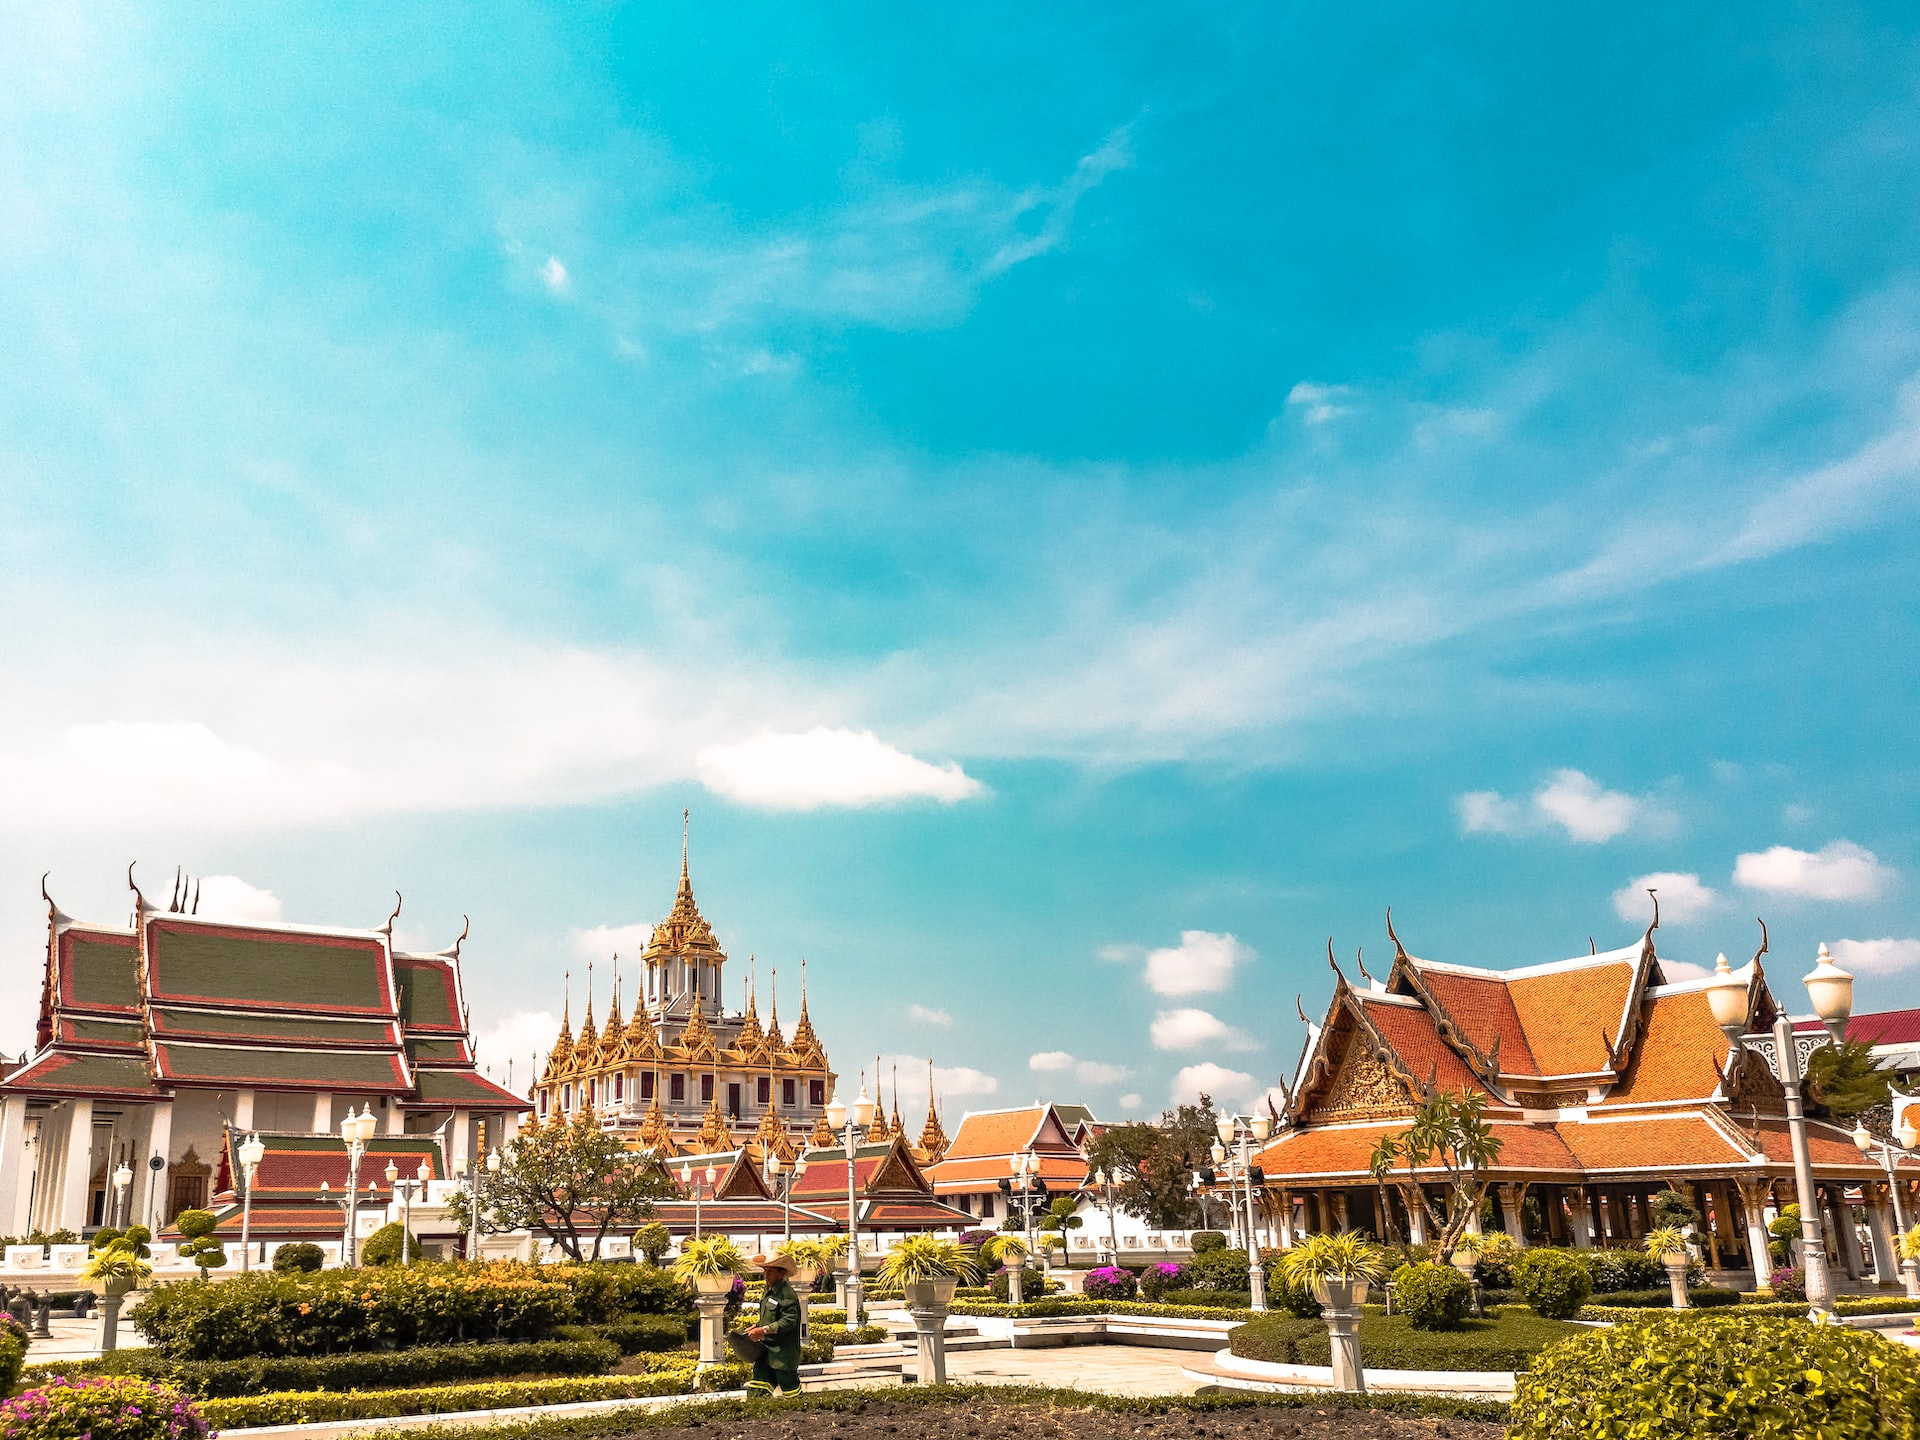 8 Thai Laws That Foreigners Should Know